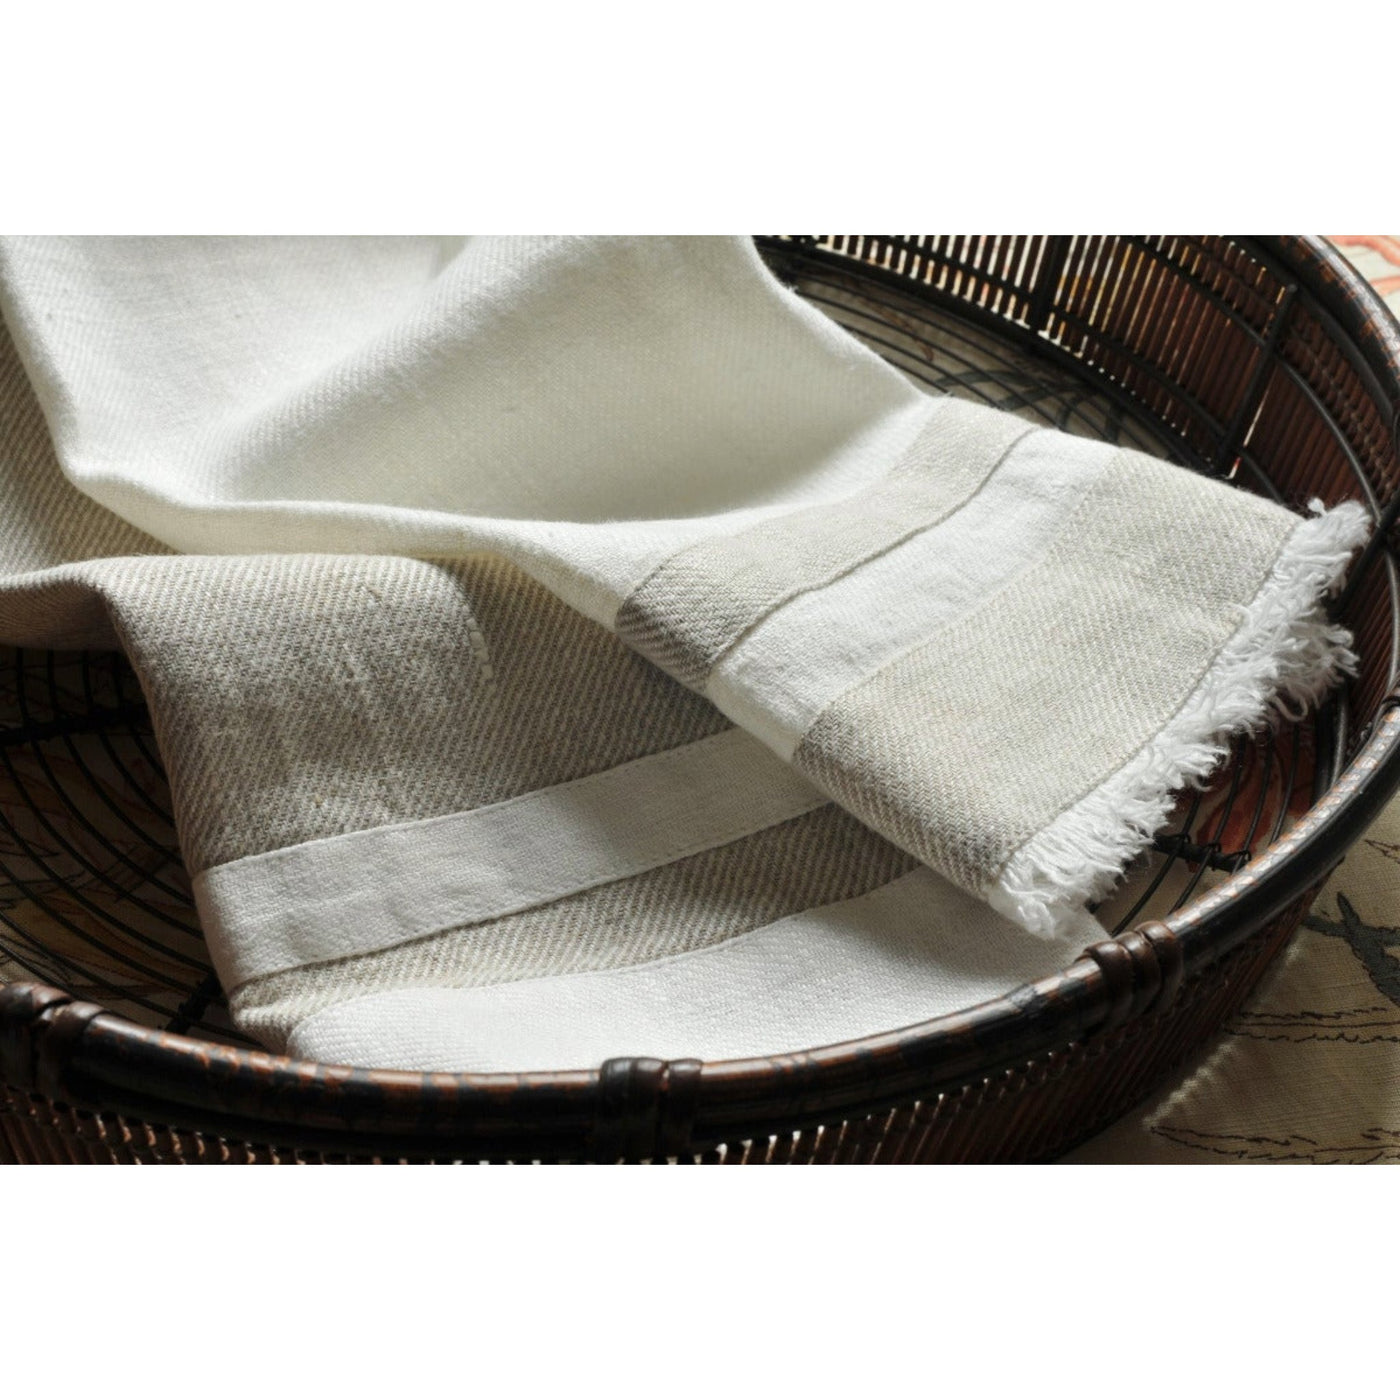 Lipari Linen Tea Towel in basket. White with beige stripes and fringed edges.